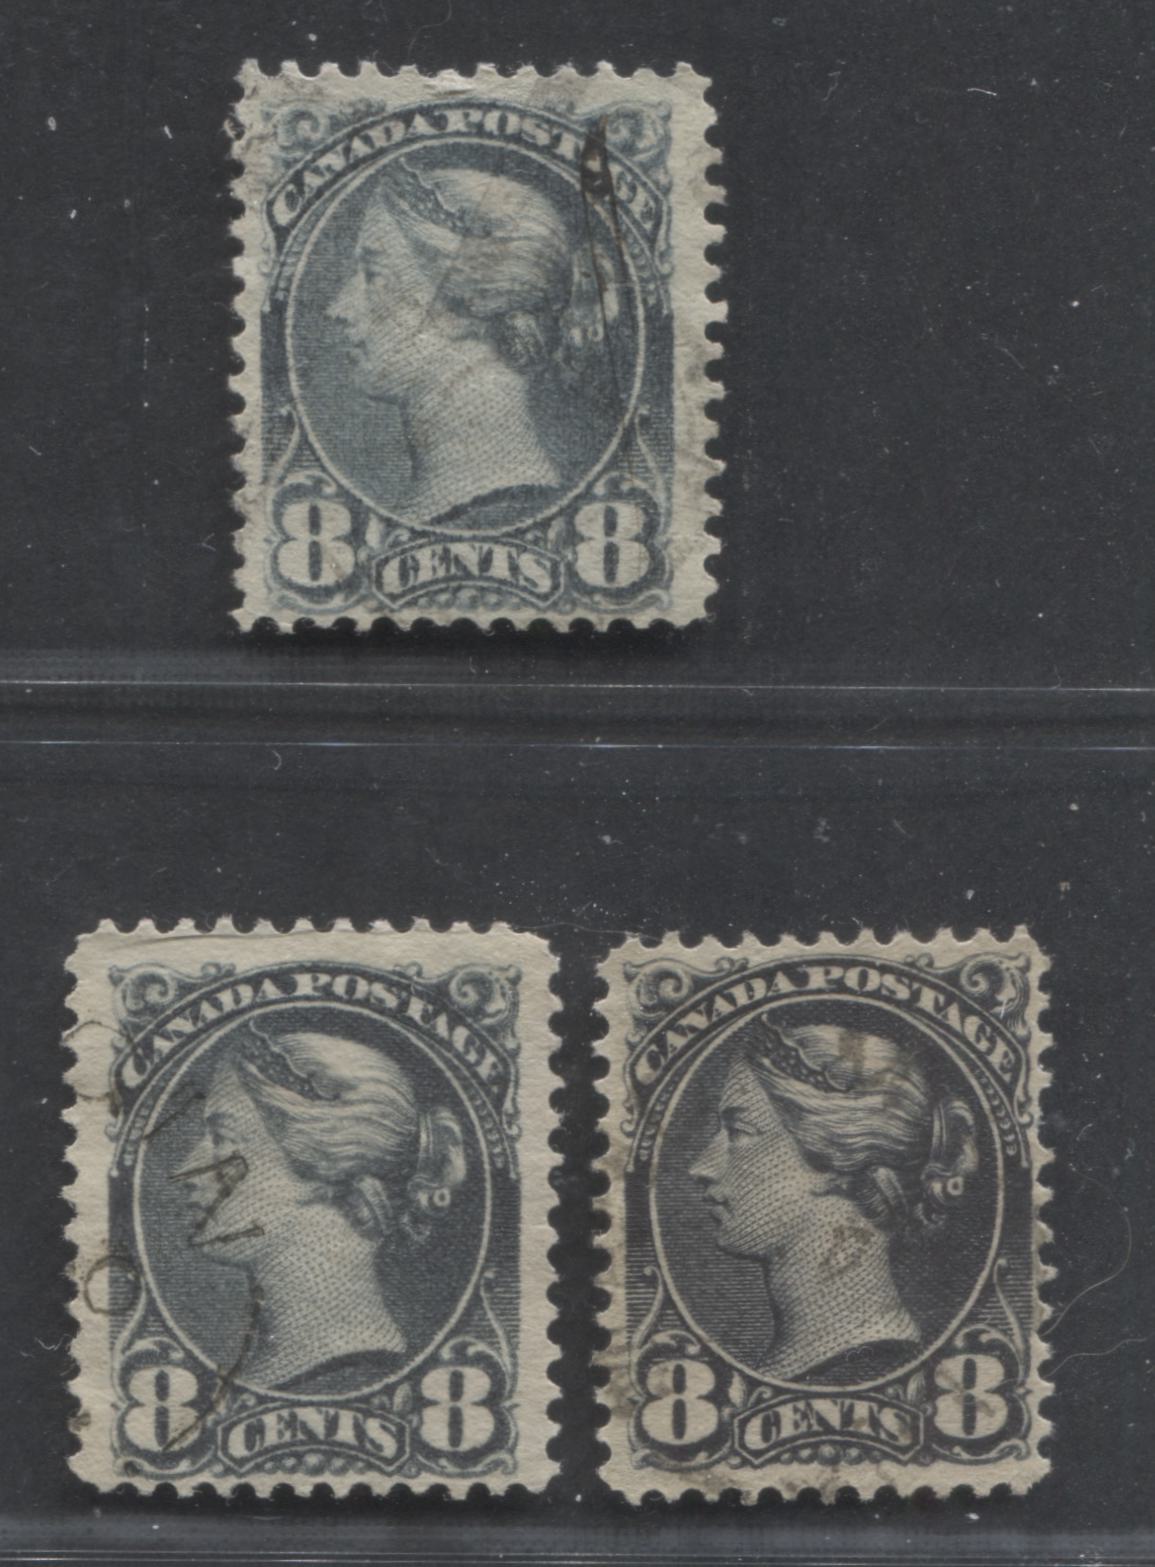 Lot 238 Canada #44, 44b 8c Violet Black & Slate Queen Victoria, 1870-1897 Small Queen Issue, 3 Fine Used Singles, Including Two Different Shades of Slate